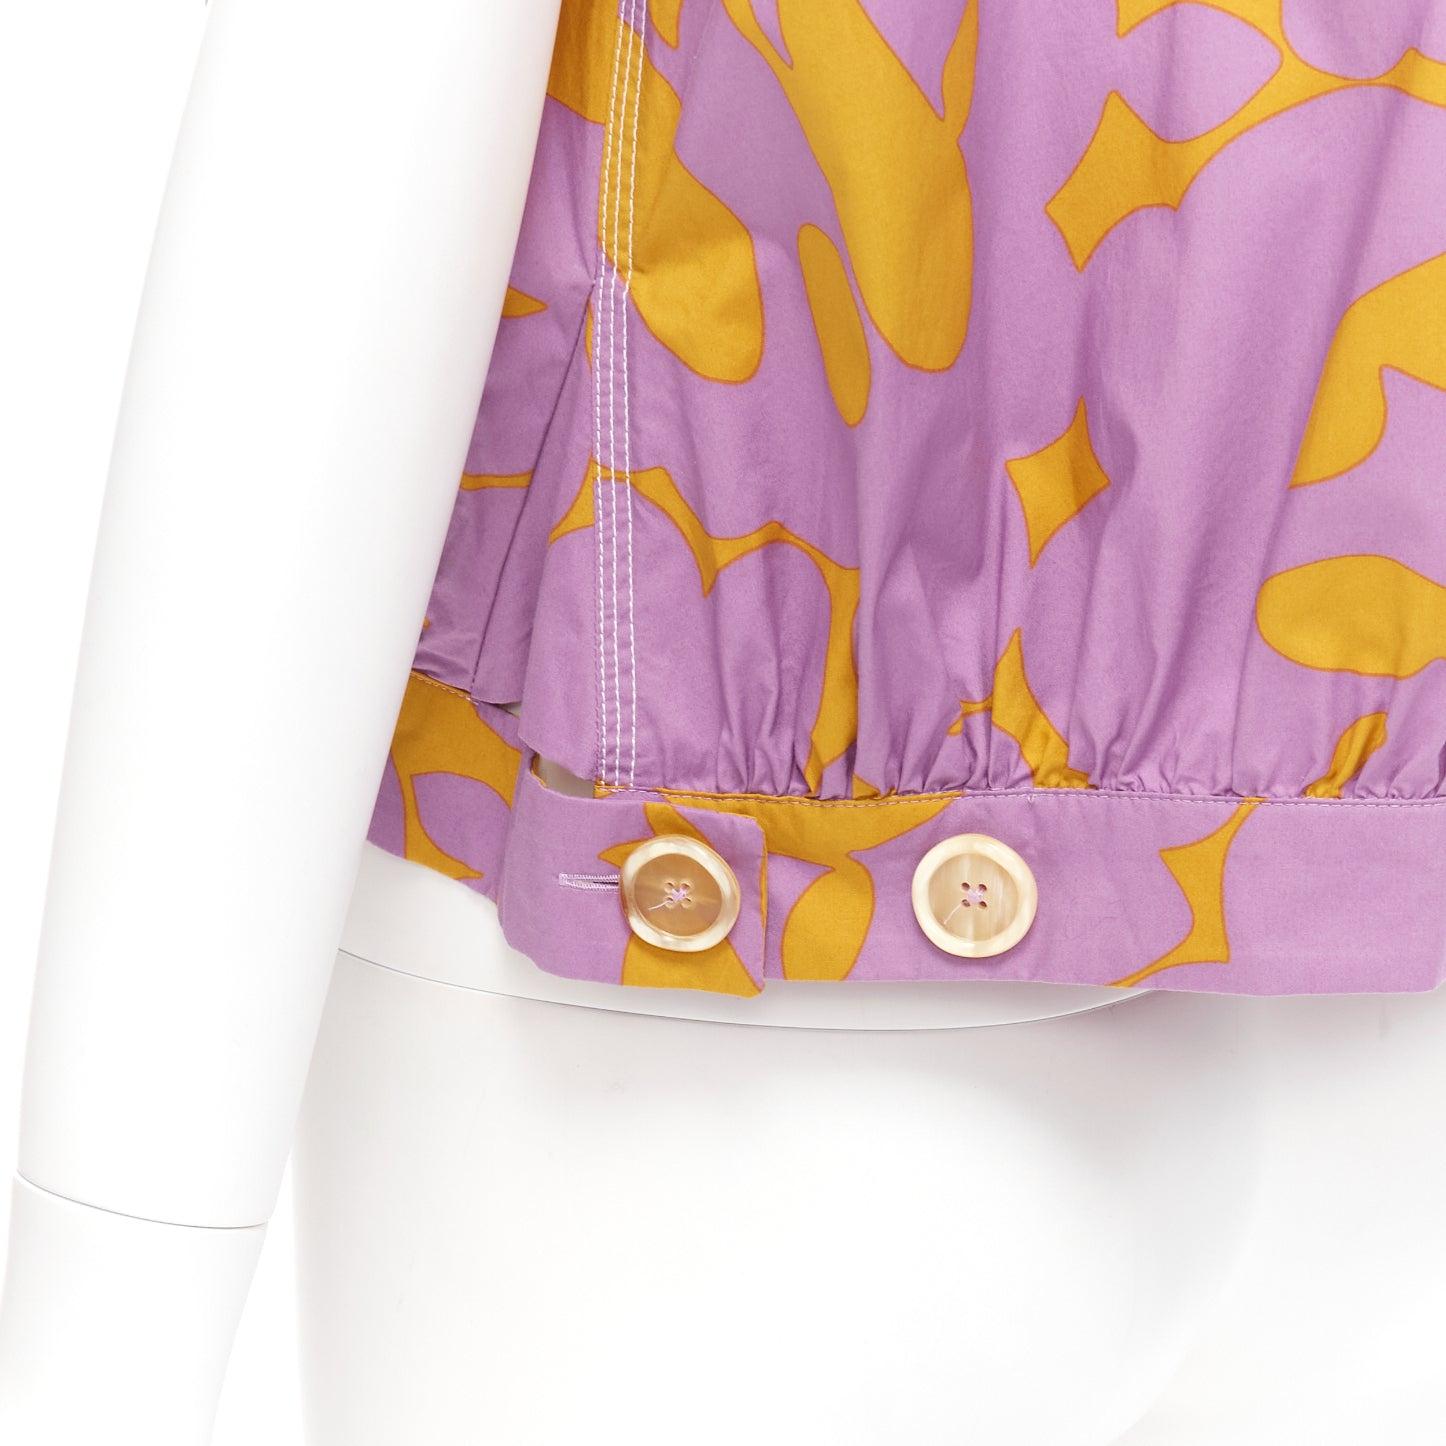 MARNI 100% cotton purple mustard abstract floral overstitched boxy vest IT38 XS
Reference: CELG/A00316
Brand: Marni
Material: Cotton
Color: Yellow, Purple
Pattern: Floral
Closure: Button
Made in: Italy

CONDITION:
Condition: Excellent, this item was